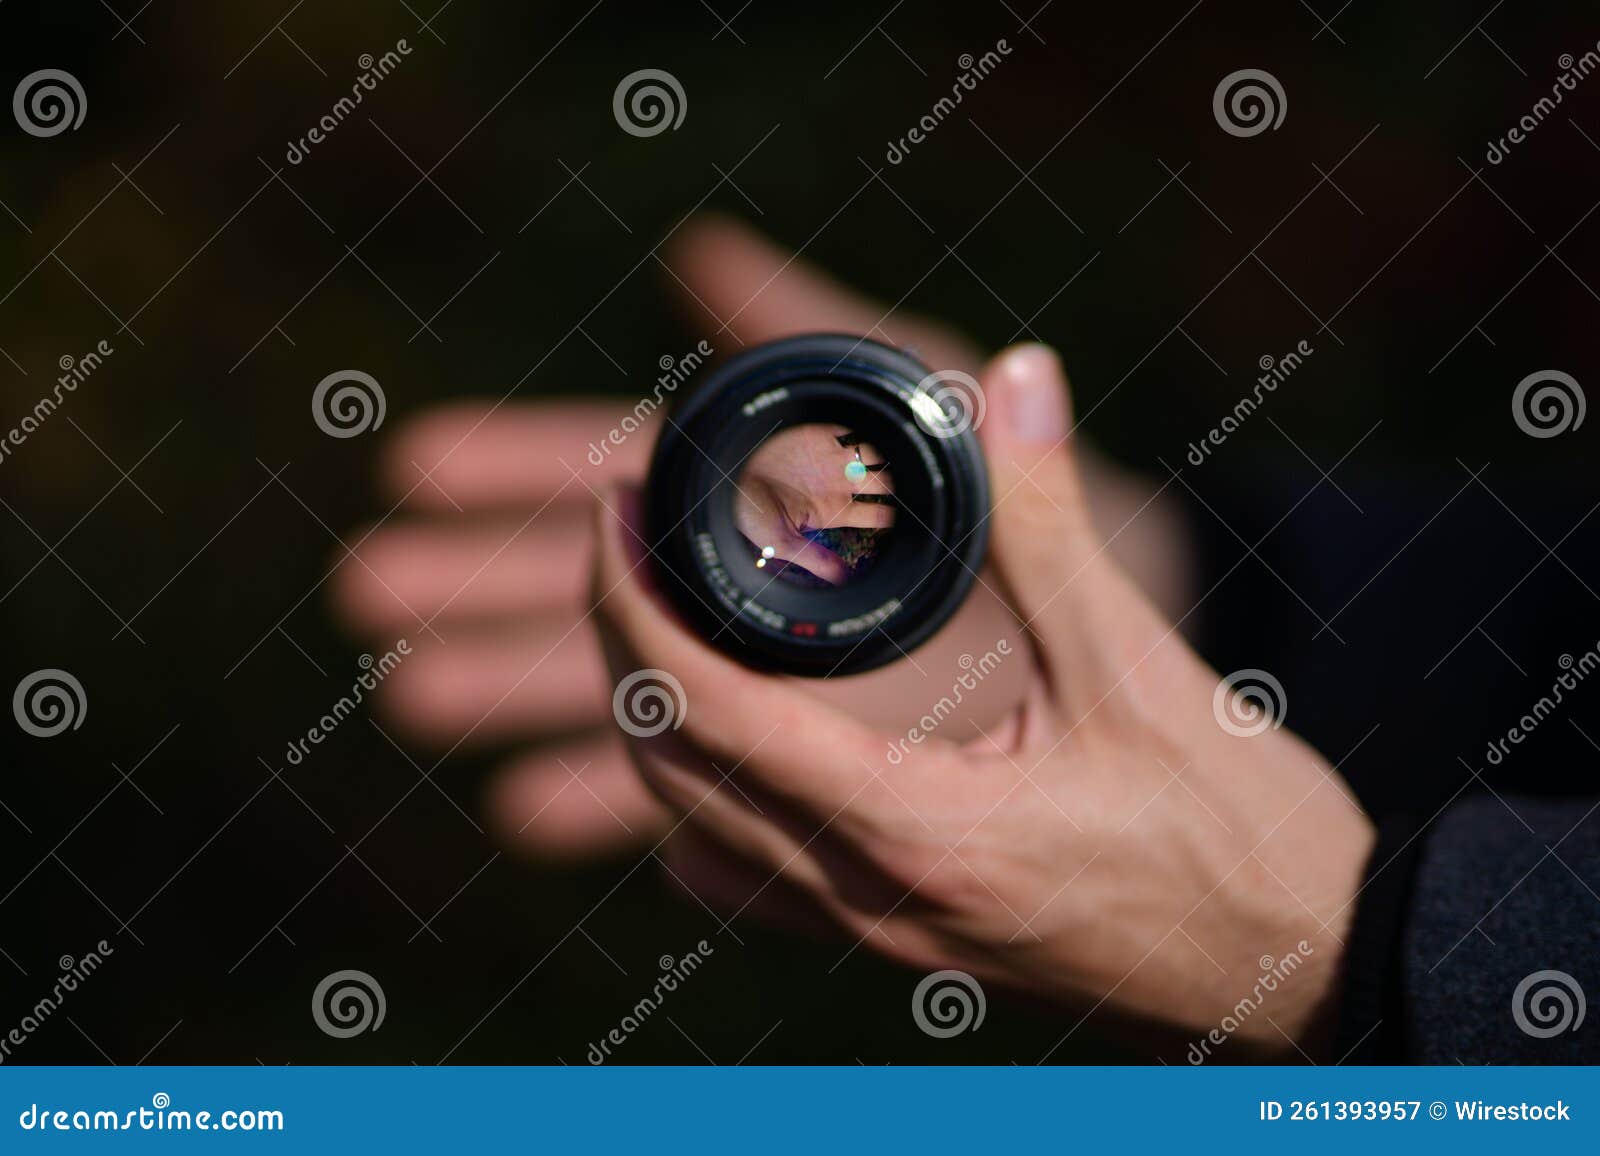 person's hand holding a 50 mm minolta camera lens with focus on the inside of the lens